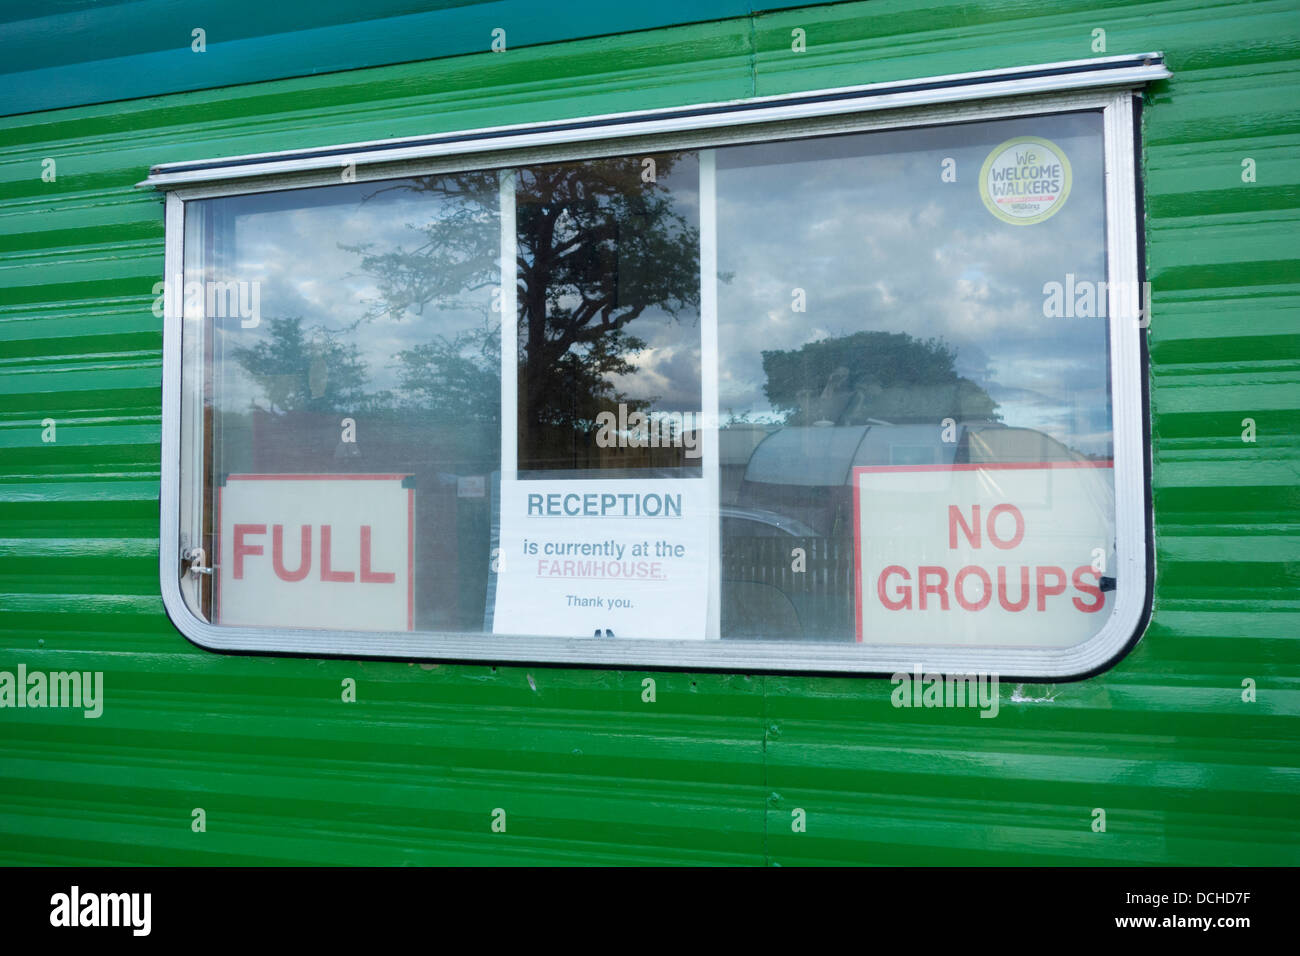 Campsite full and no groups sign at campsite in England, UK Stock Photo